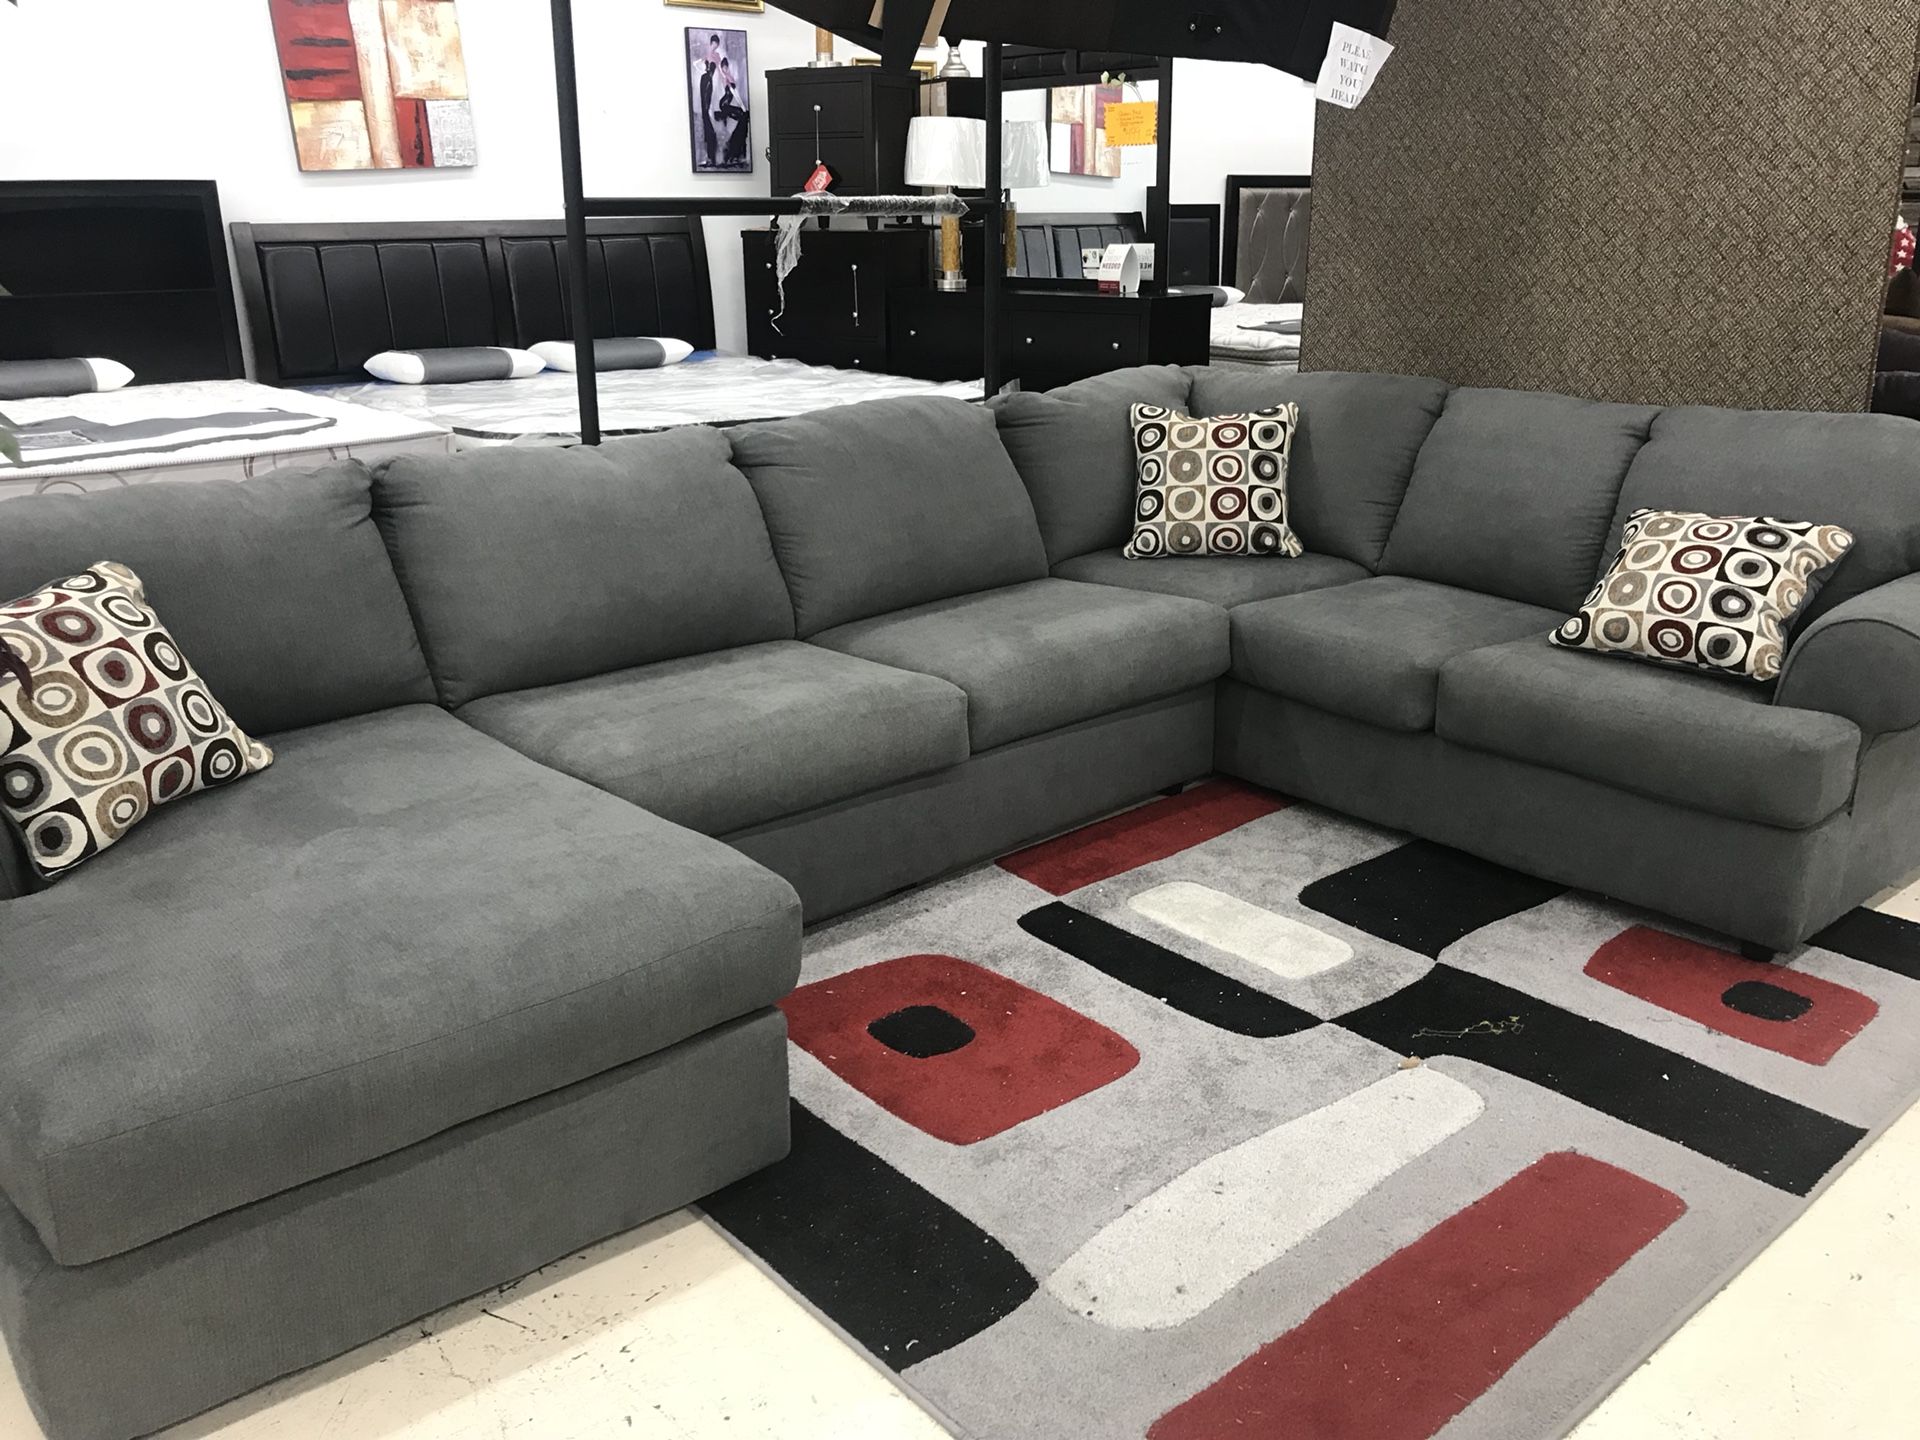 LIVING ROOM SET 3 PC SECTIONAL ON SALE